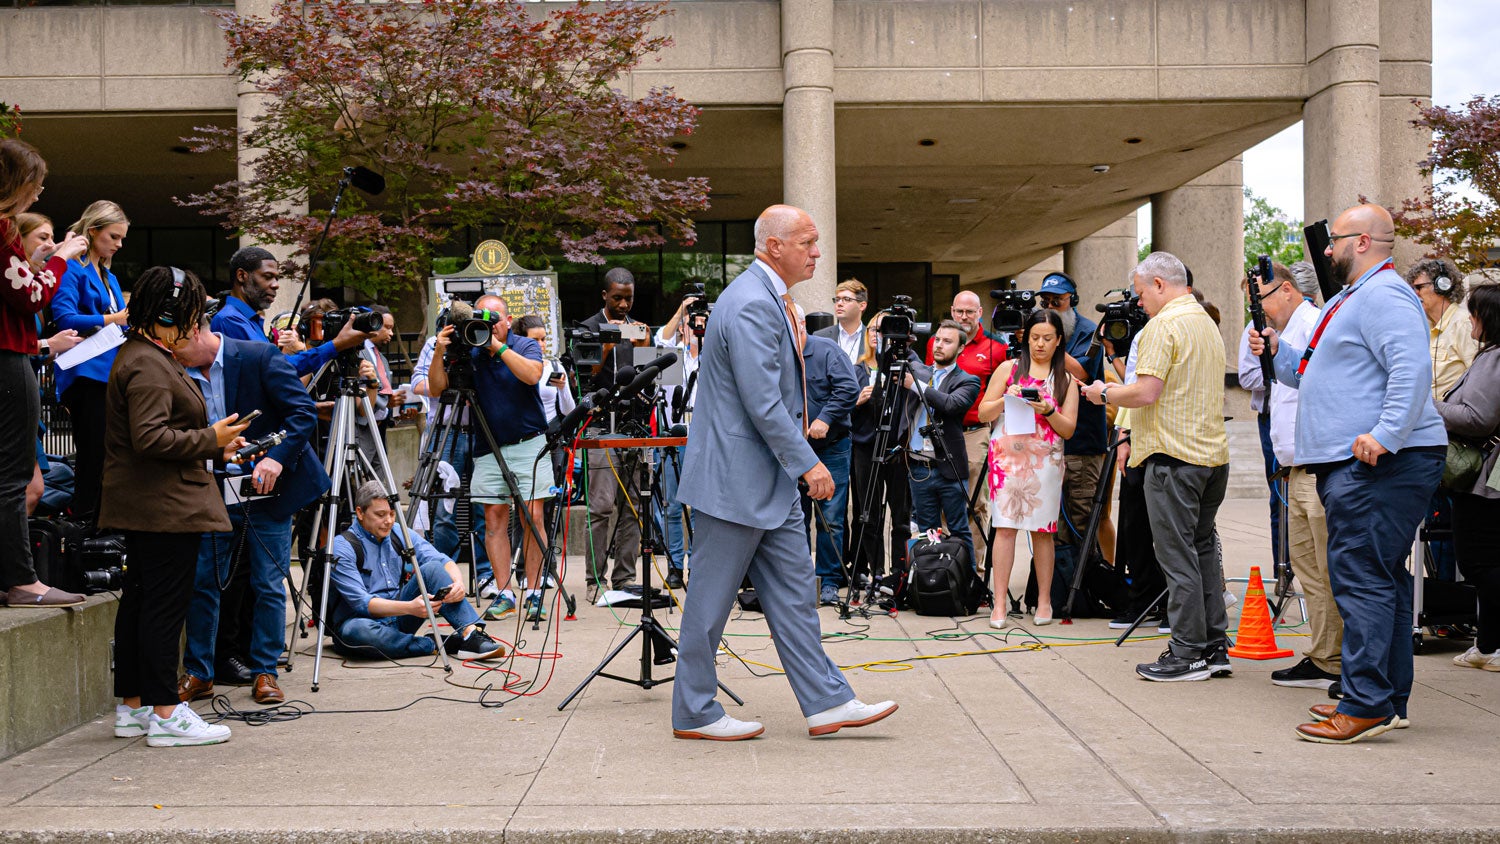 Steve Romines, legal representation for golfer Scottie Scheffler, walks away after an announcement by Jefferson County Attorney Mike O'Connel at Jefferson County Hall of Justice